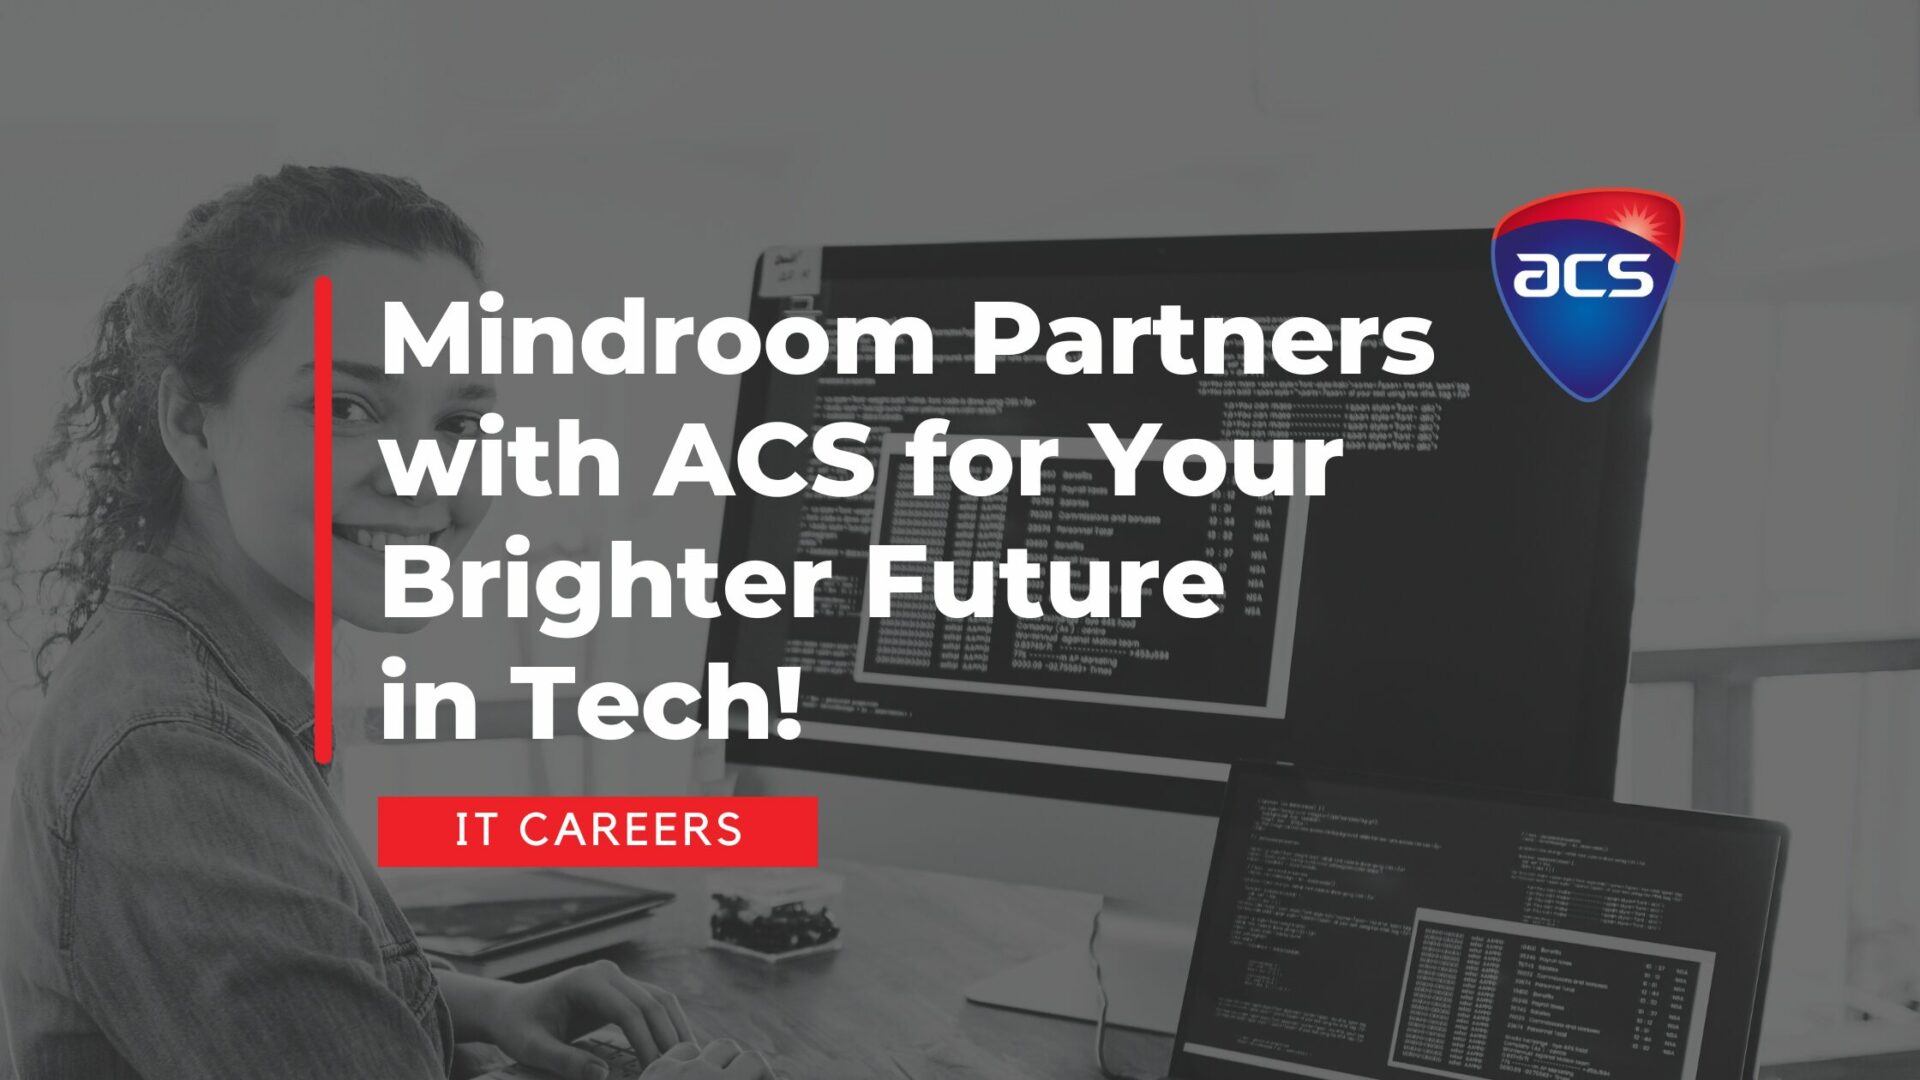 Mindroom Partners with ACS for Your Brighter Future in Tech!